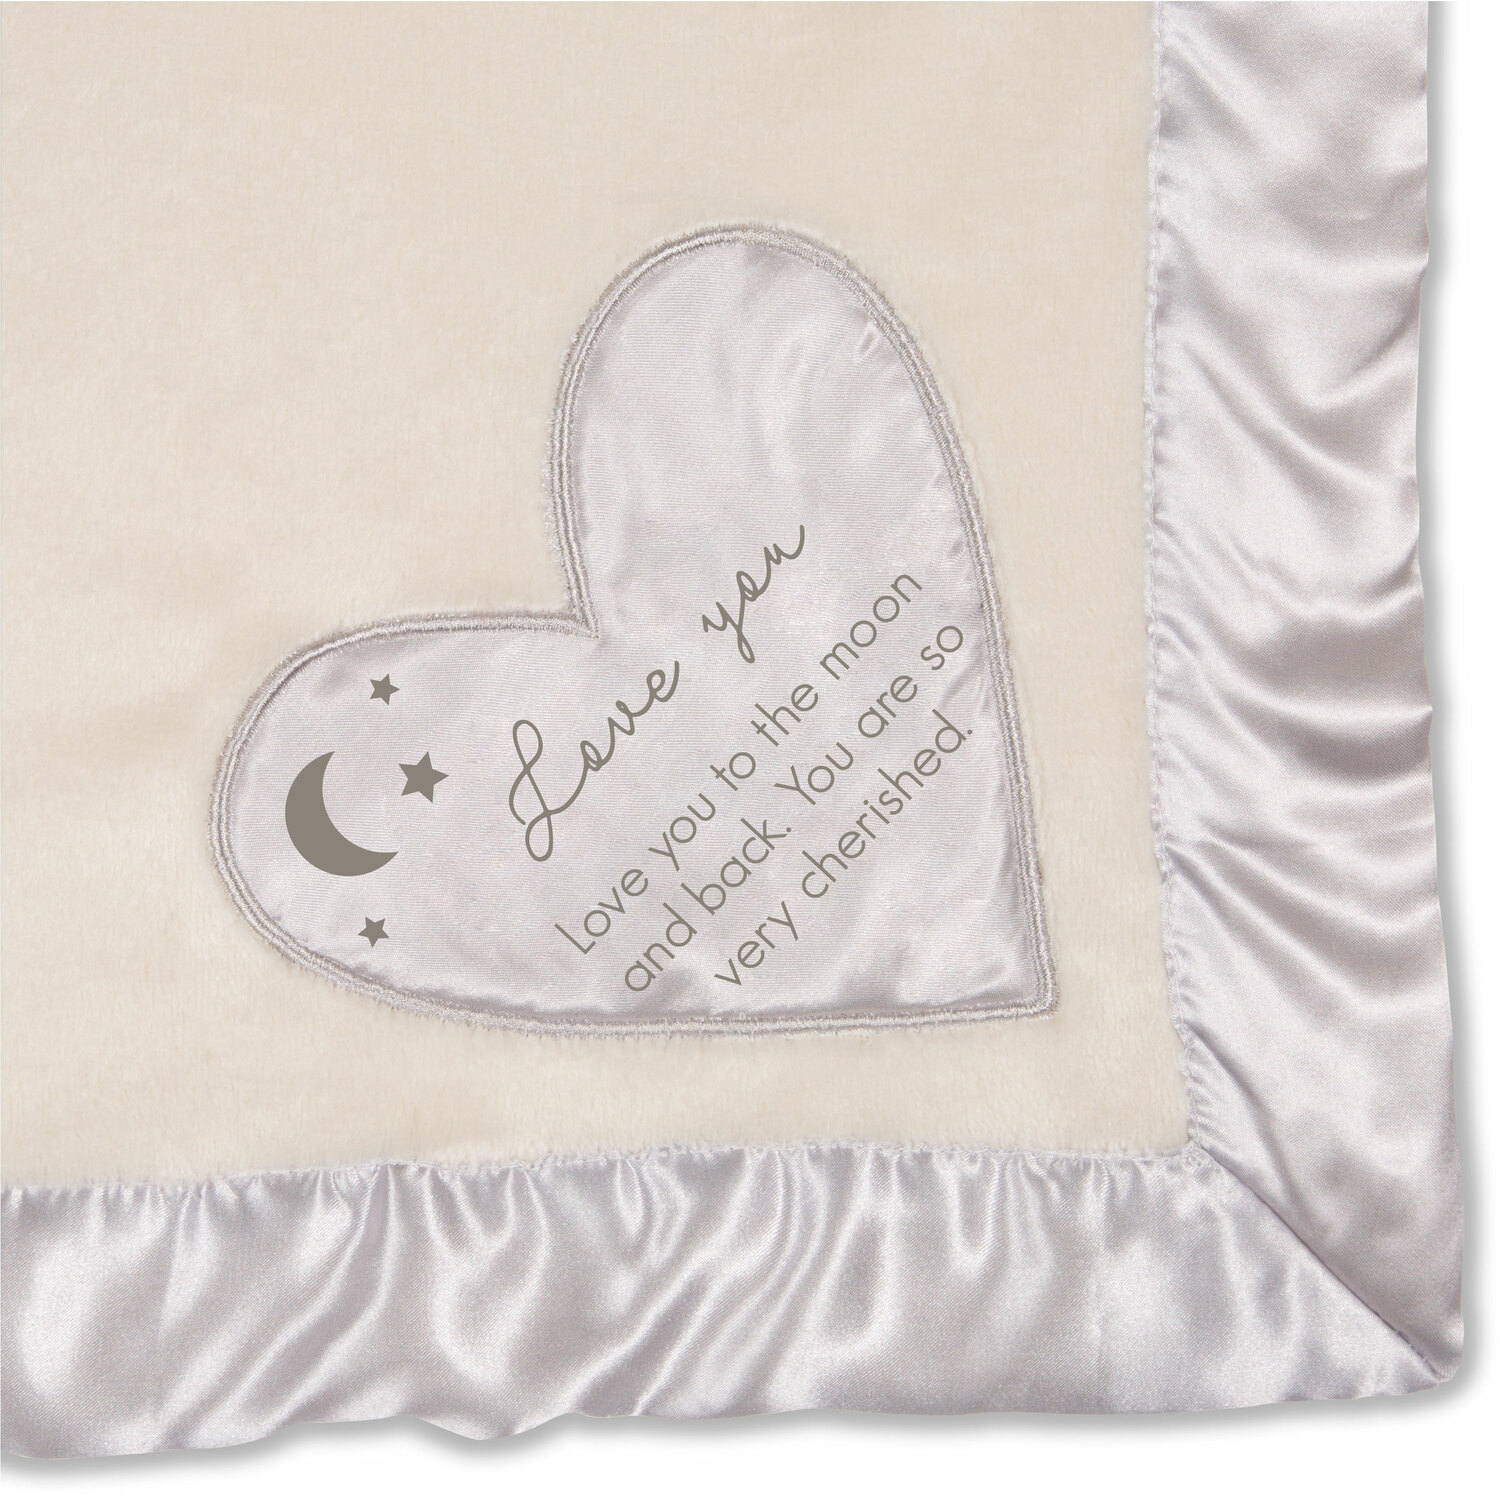 Love You to the Moon by Comfort Blanket - Love You to the Moon - 30" x 40" Royal Plush Blanket